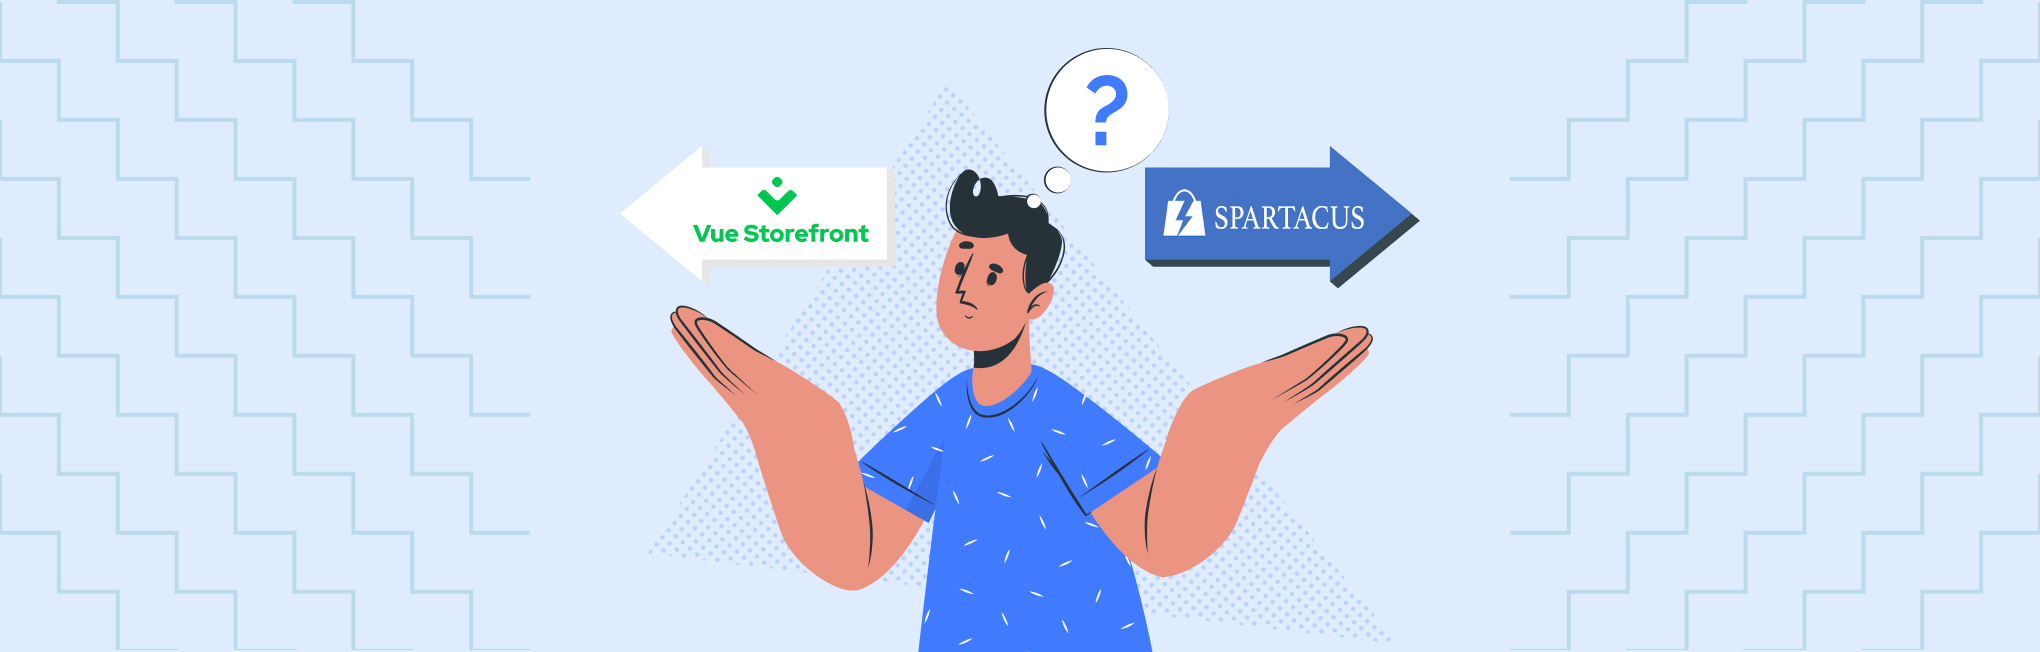 Vue Storefront vs. Spartacus: Which Headless Frontend is Better?